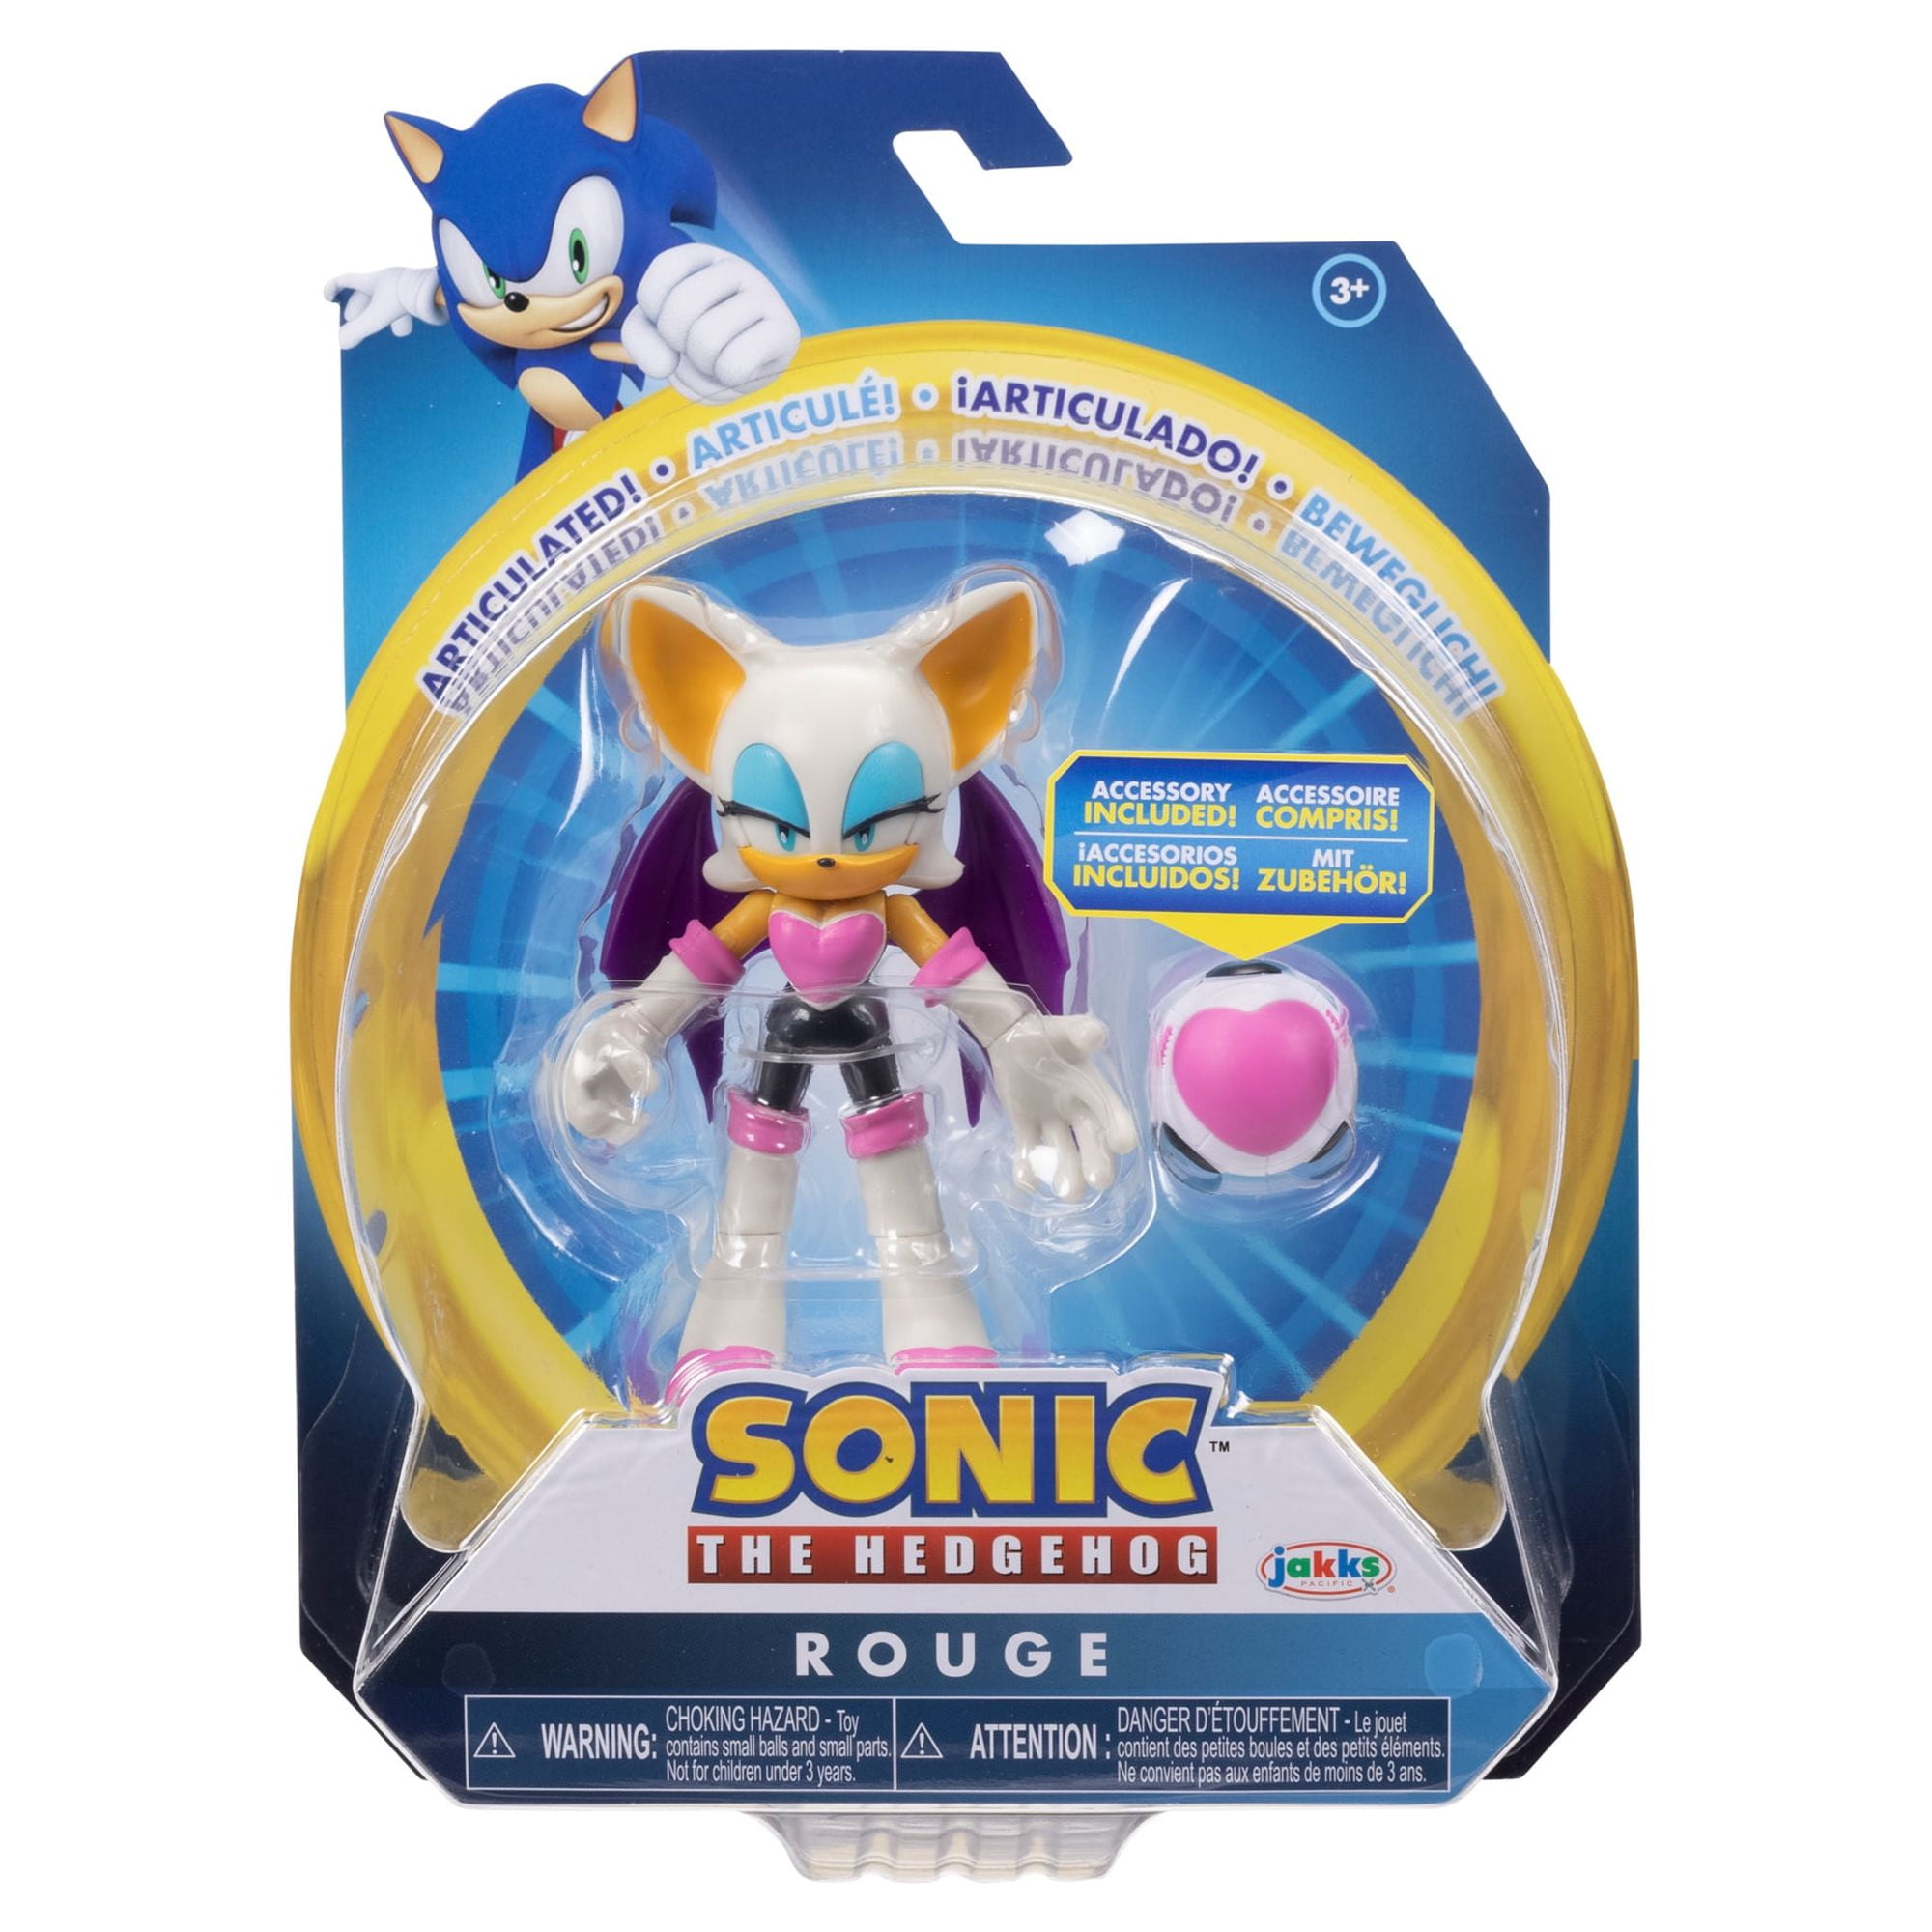 Sonic Prime Paradox Prism Capsule with Figure, Shard and Leaflet – 8 Styles